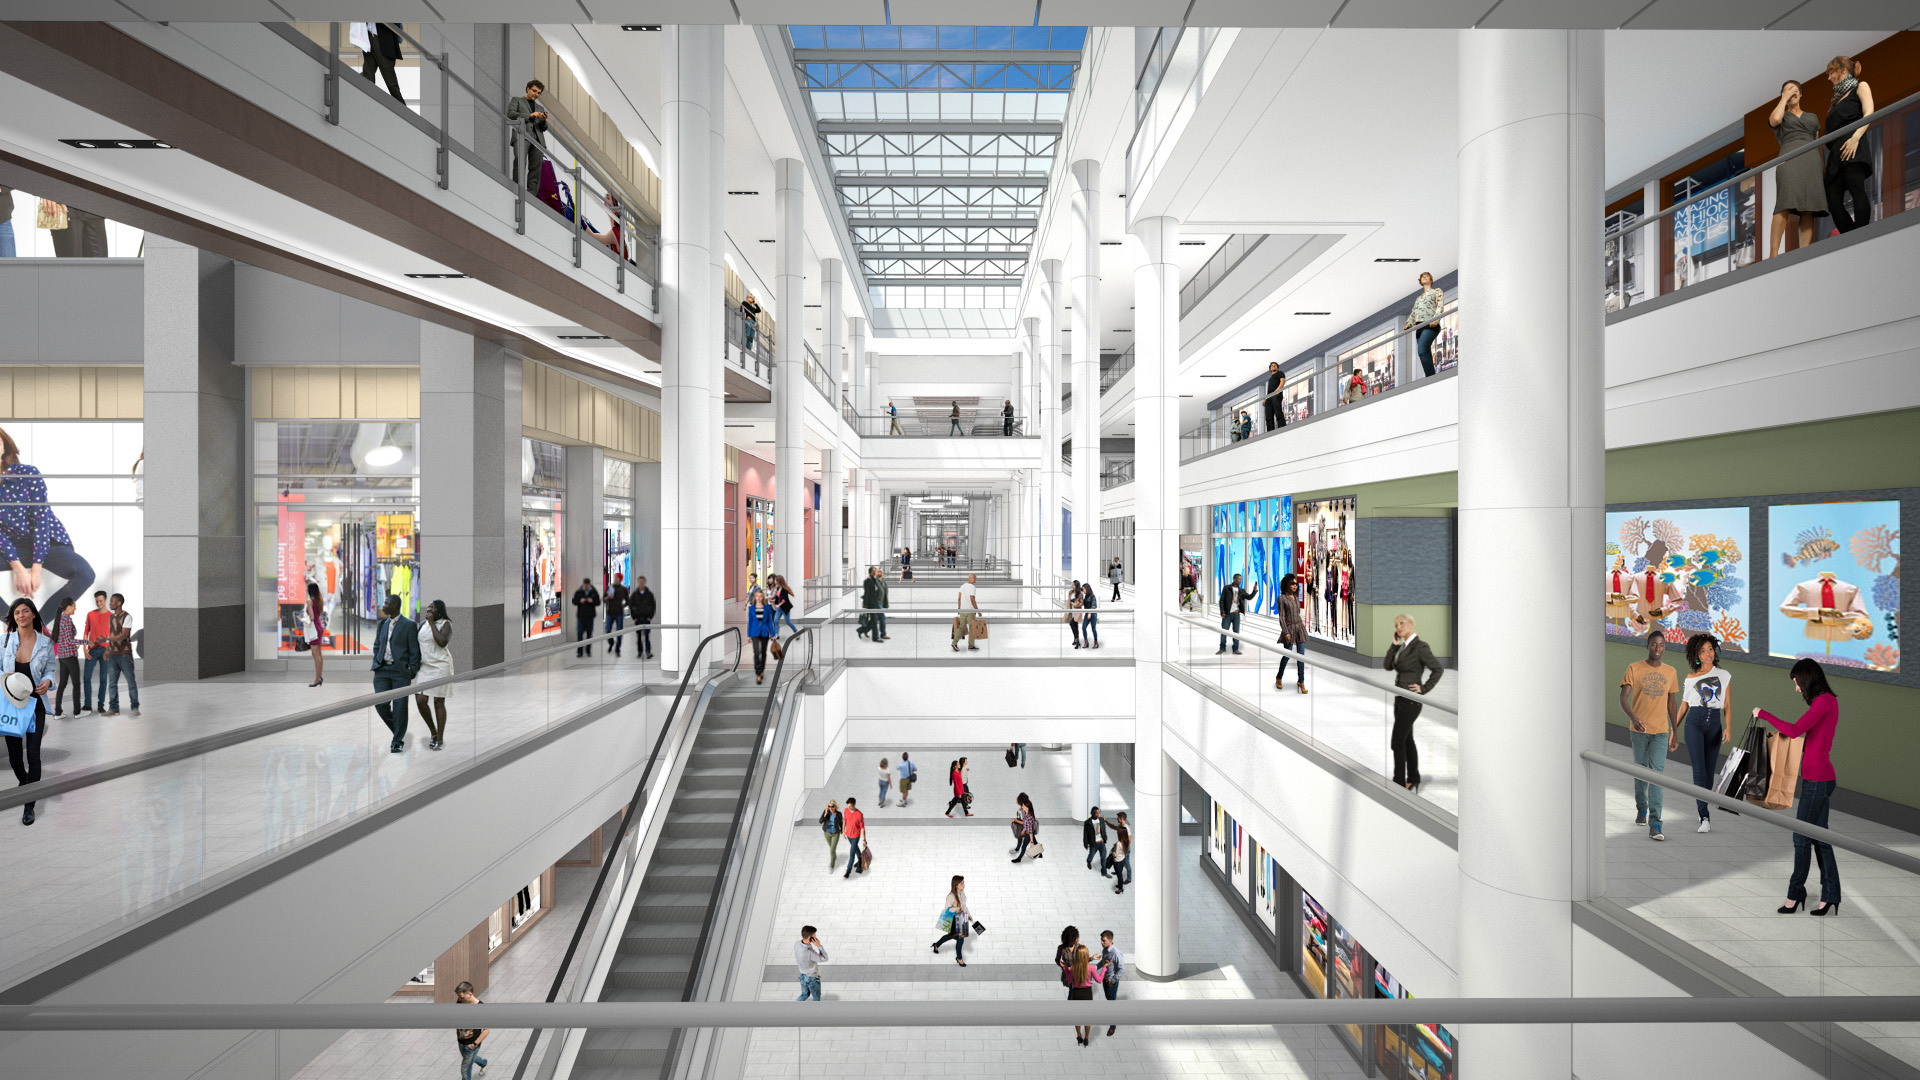 Construction begins on massive Gallery Mall project - Curbed Philly